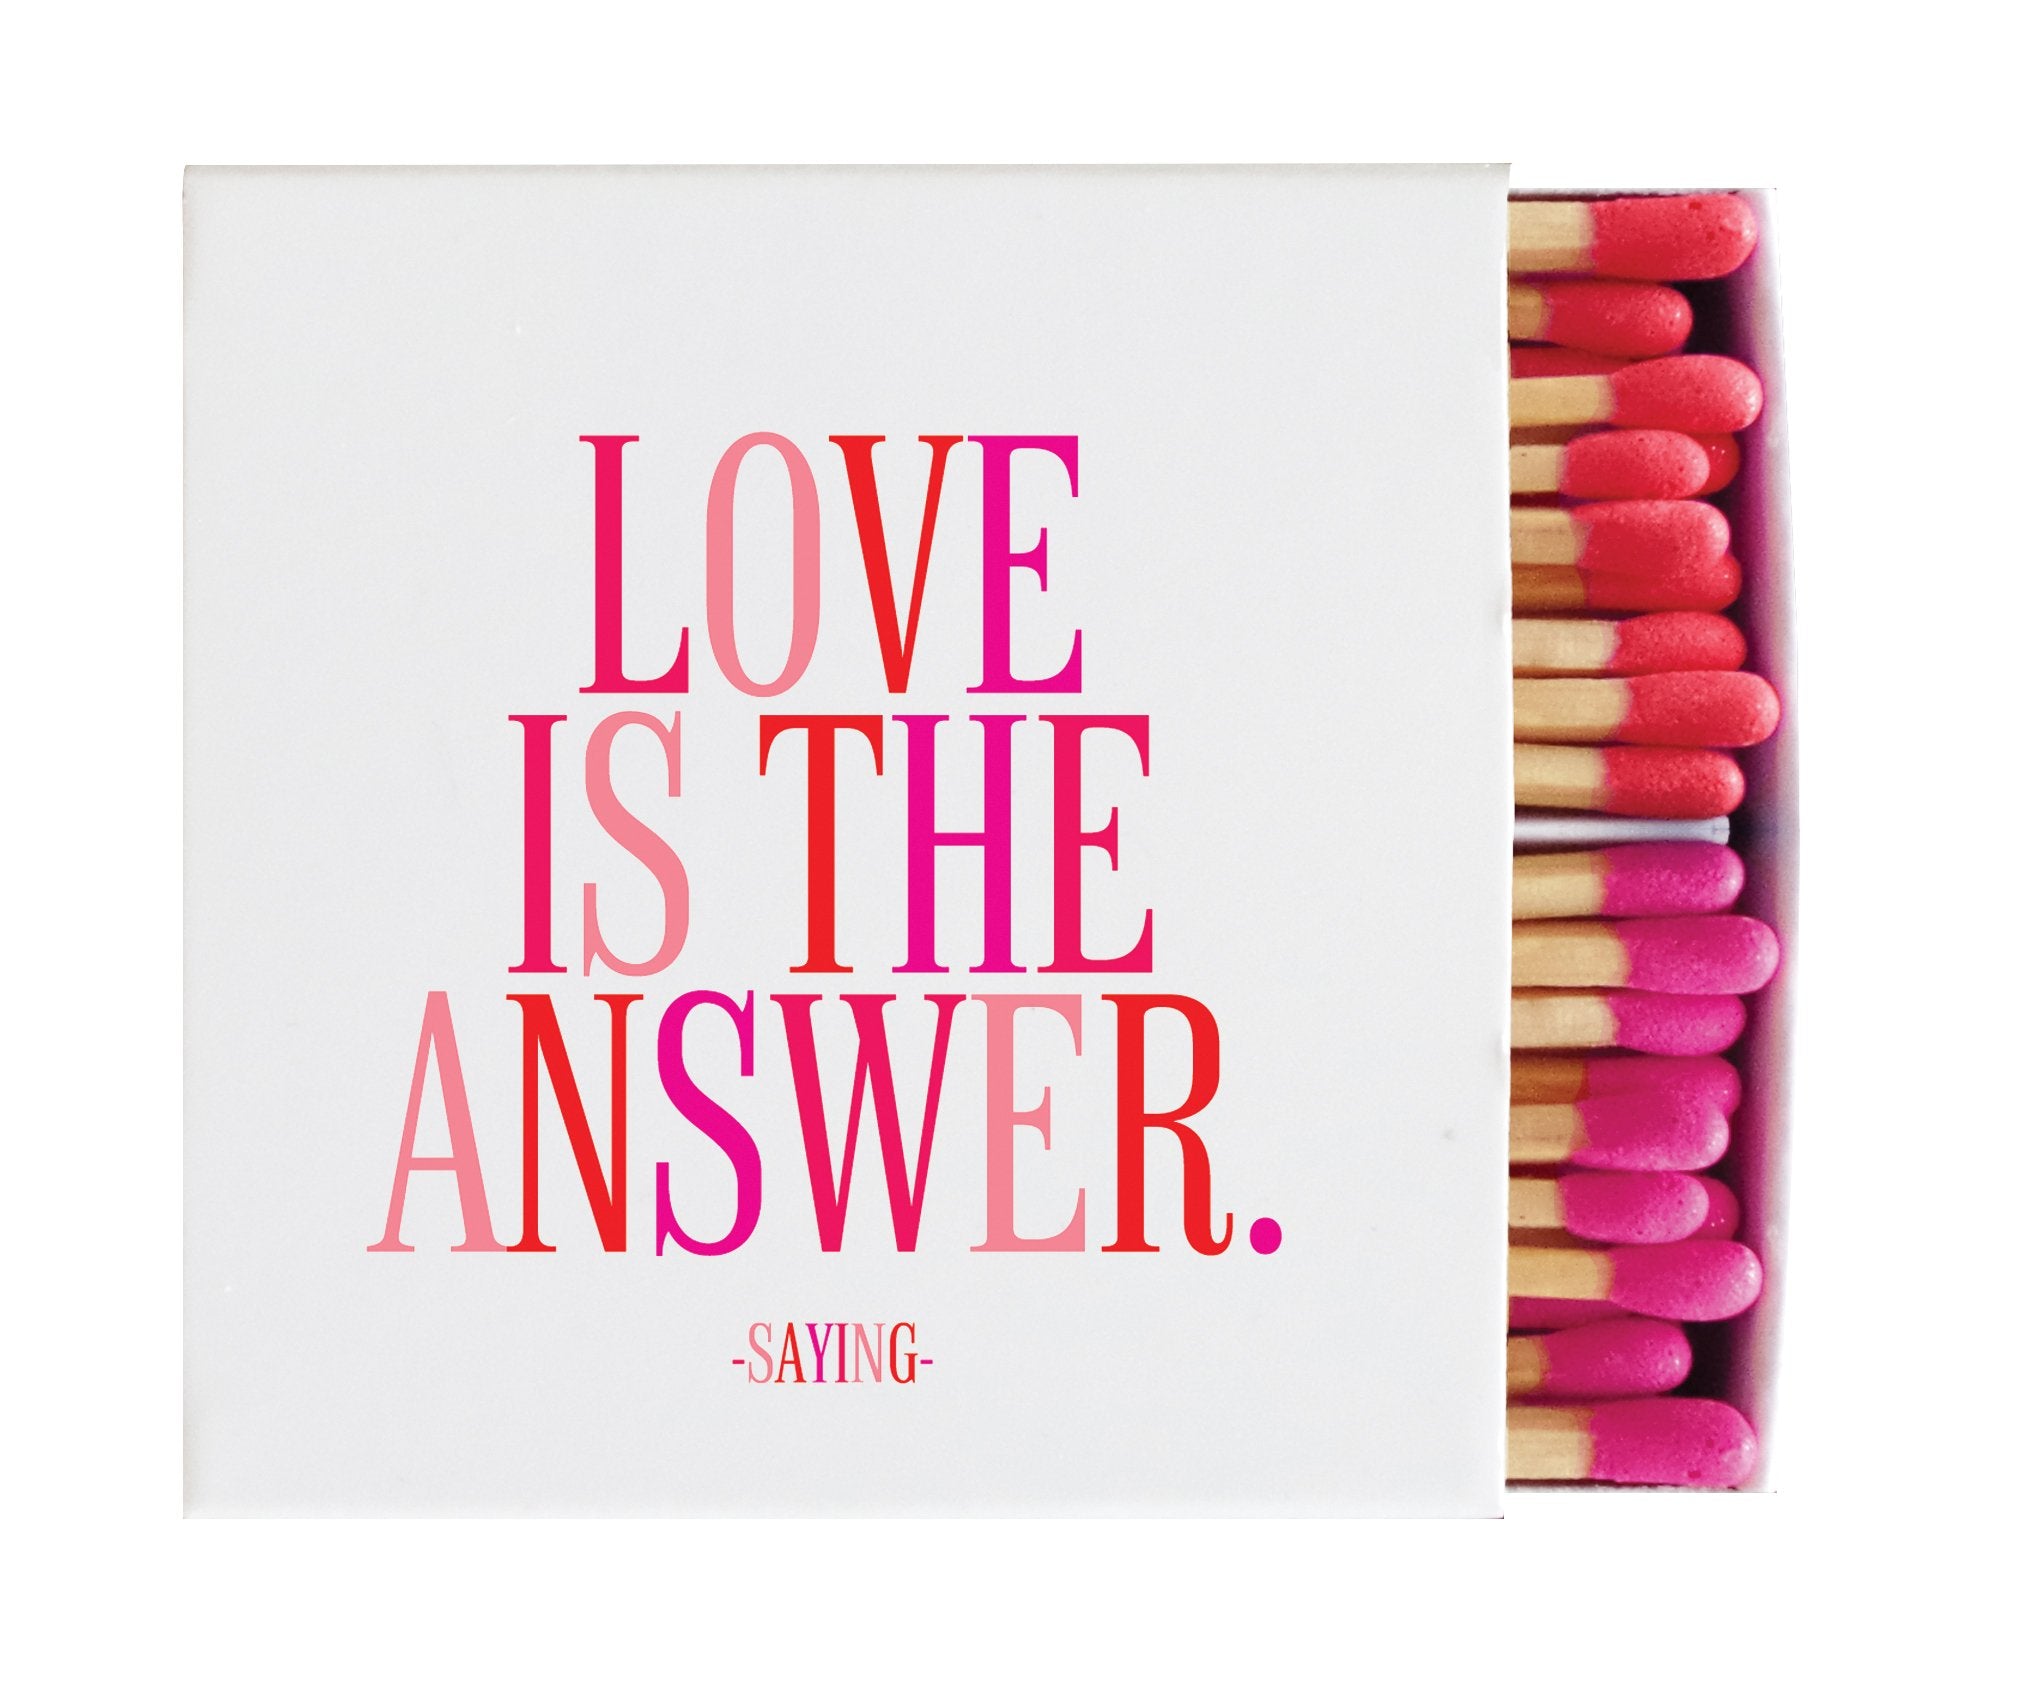 Matchboxes - X319 match -Love Is The Answer (Saying) - Spiral Circle